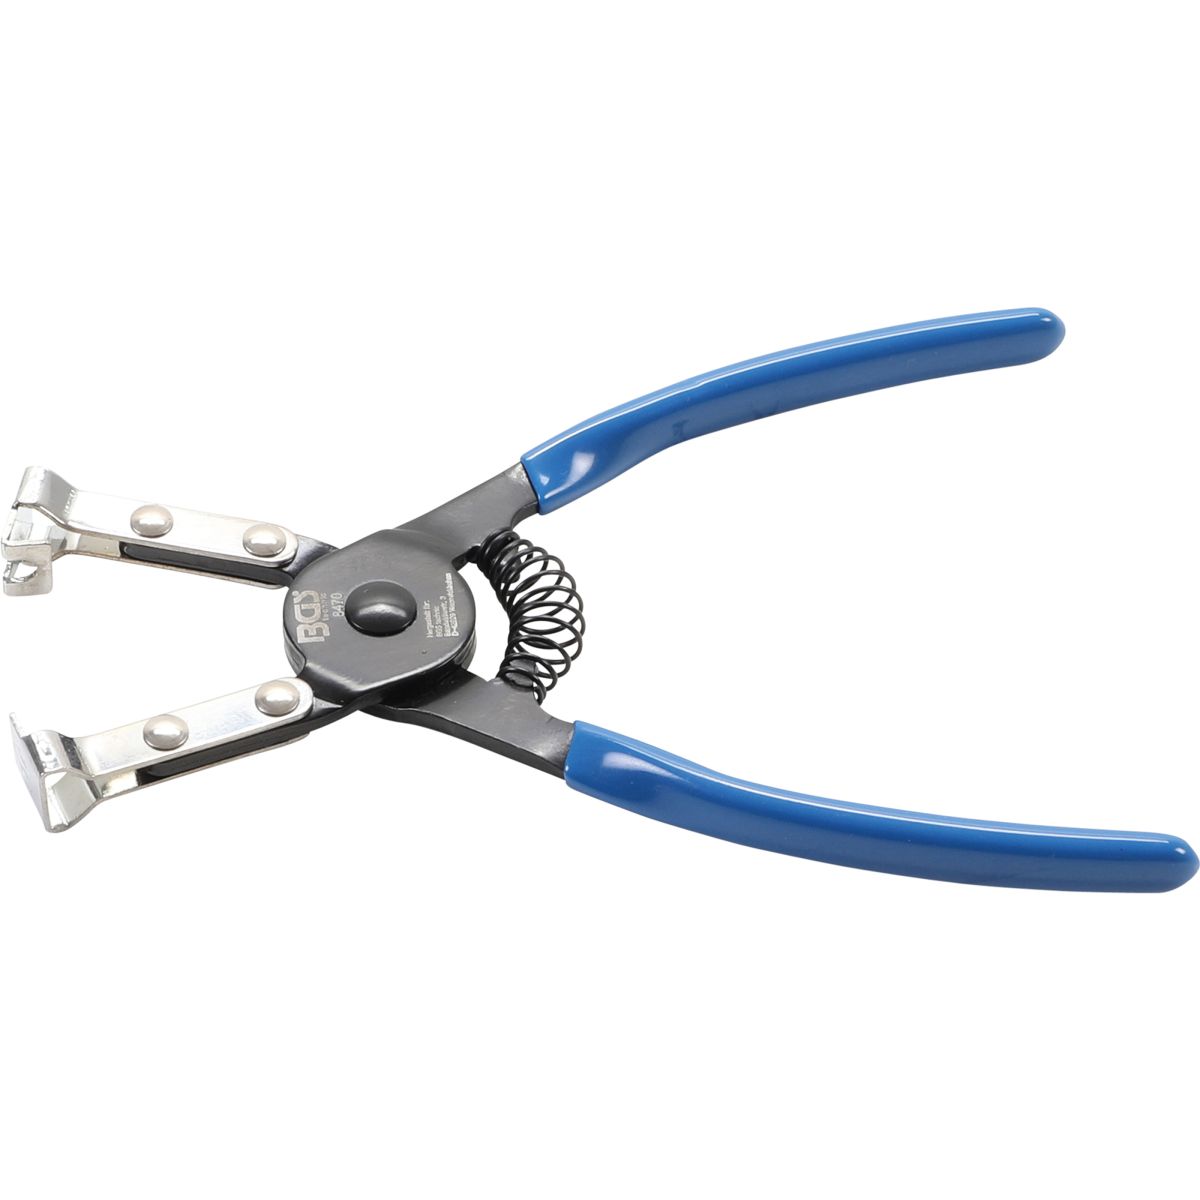 Hose Clamp Pliers | for CLIC-L Hose Clamps | 150 mm